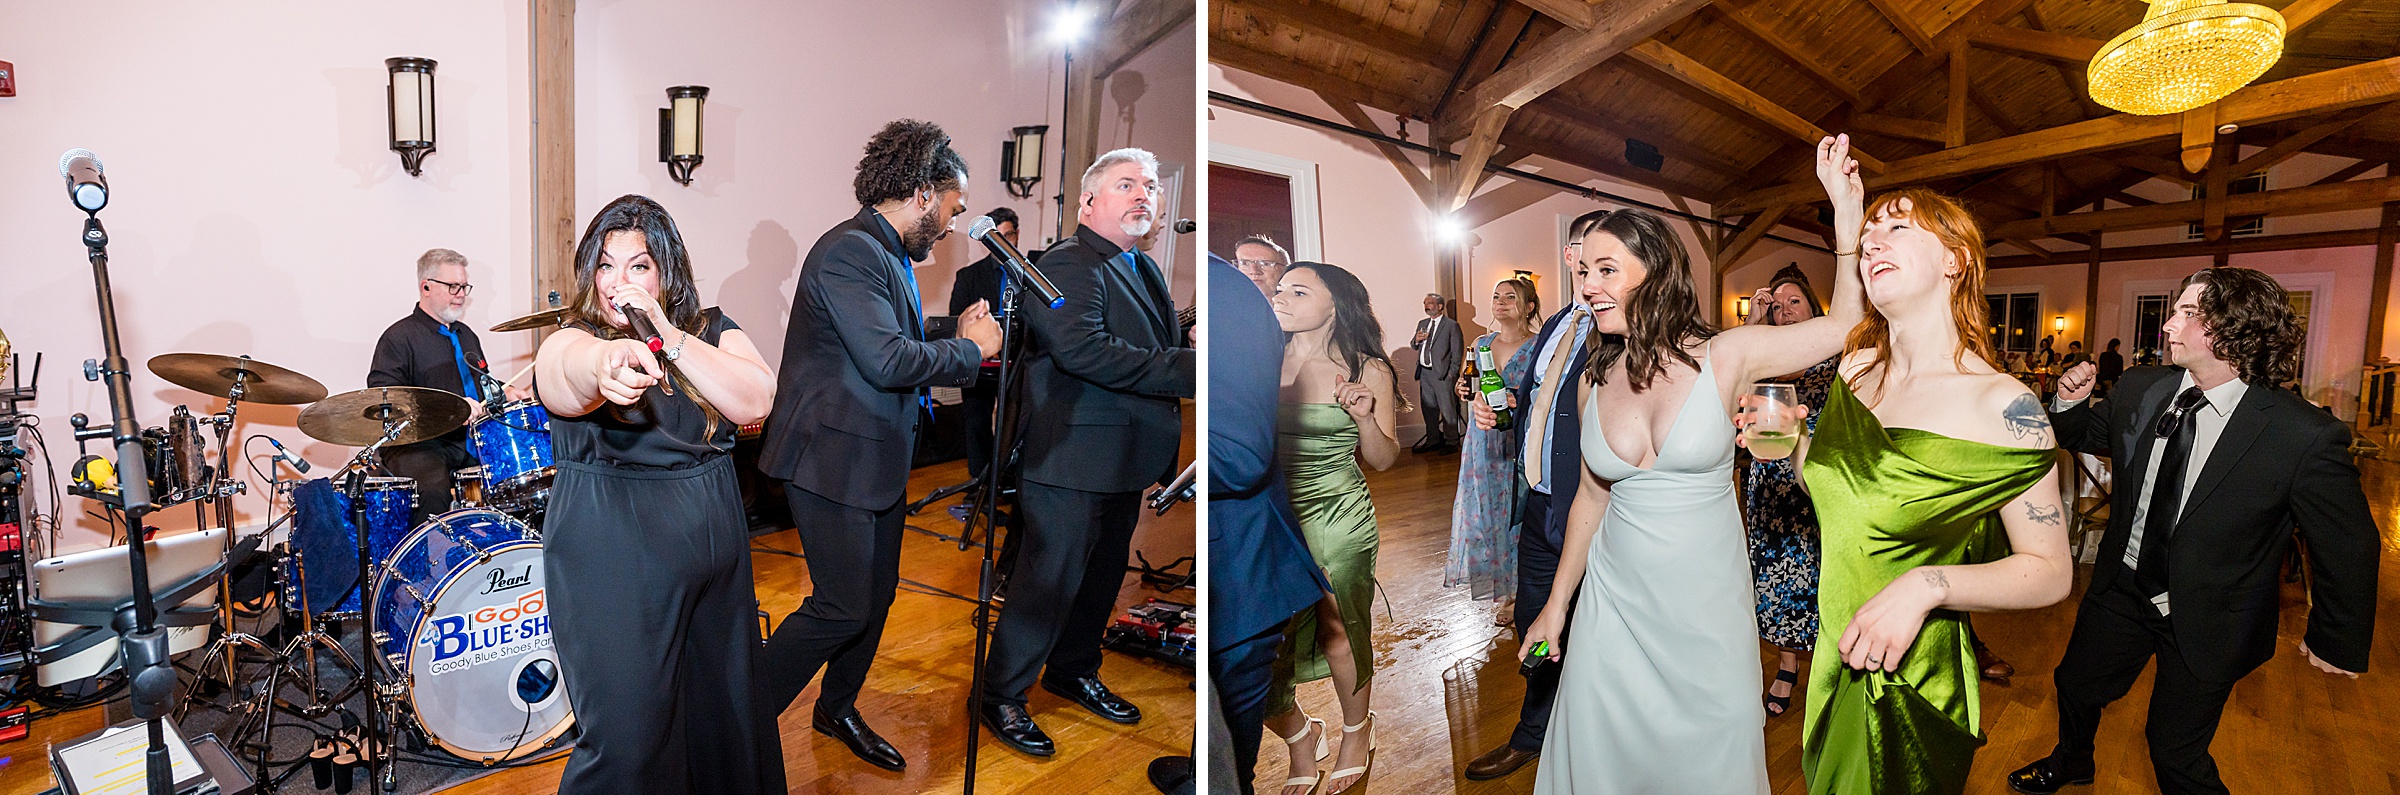 A band performs on stage as people dance and enjoy themselves at an indoor event. Left: Band members sing and play instruments. Right: Attendees dance energetically in formal attire.